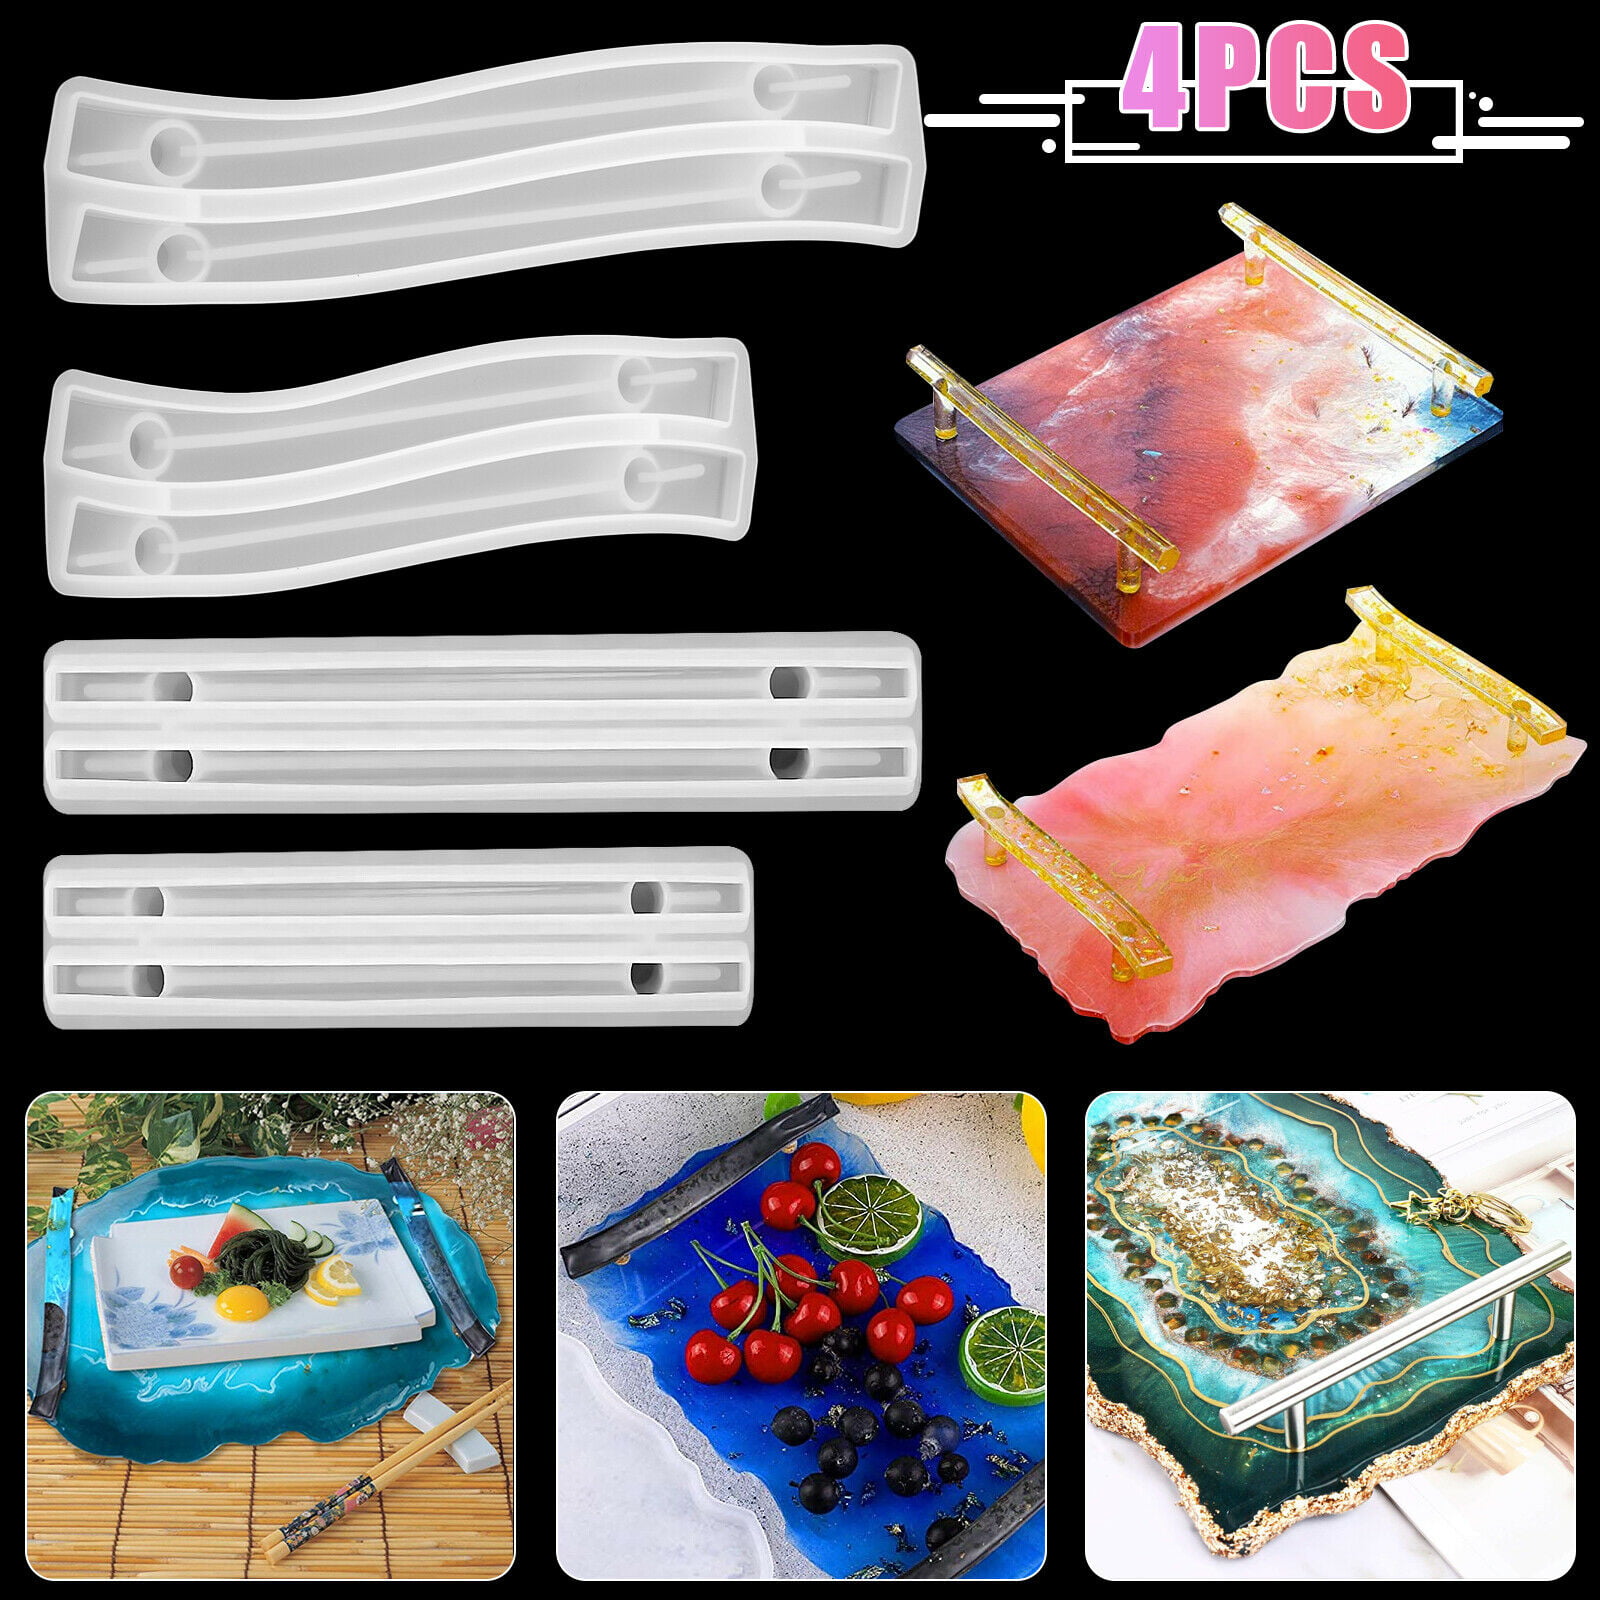 EPOXY RESIN CLEAR FLEXIBLE TOUGH STRETCHY & TEAR RESISTANT 4 CASTING & MODELING! 